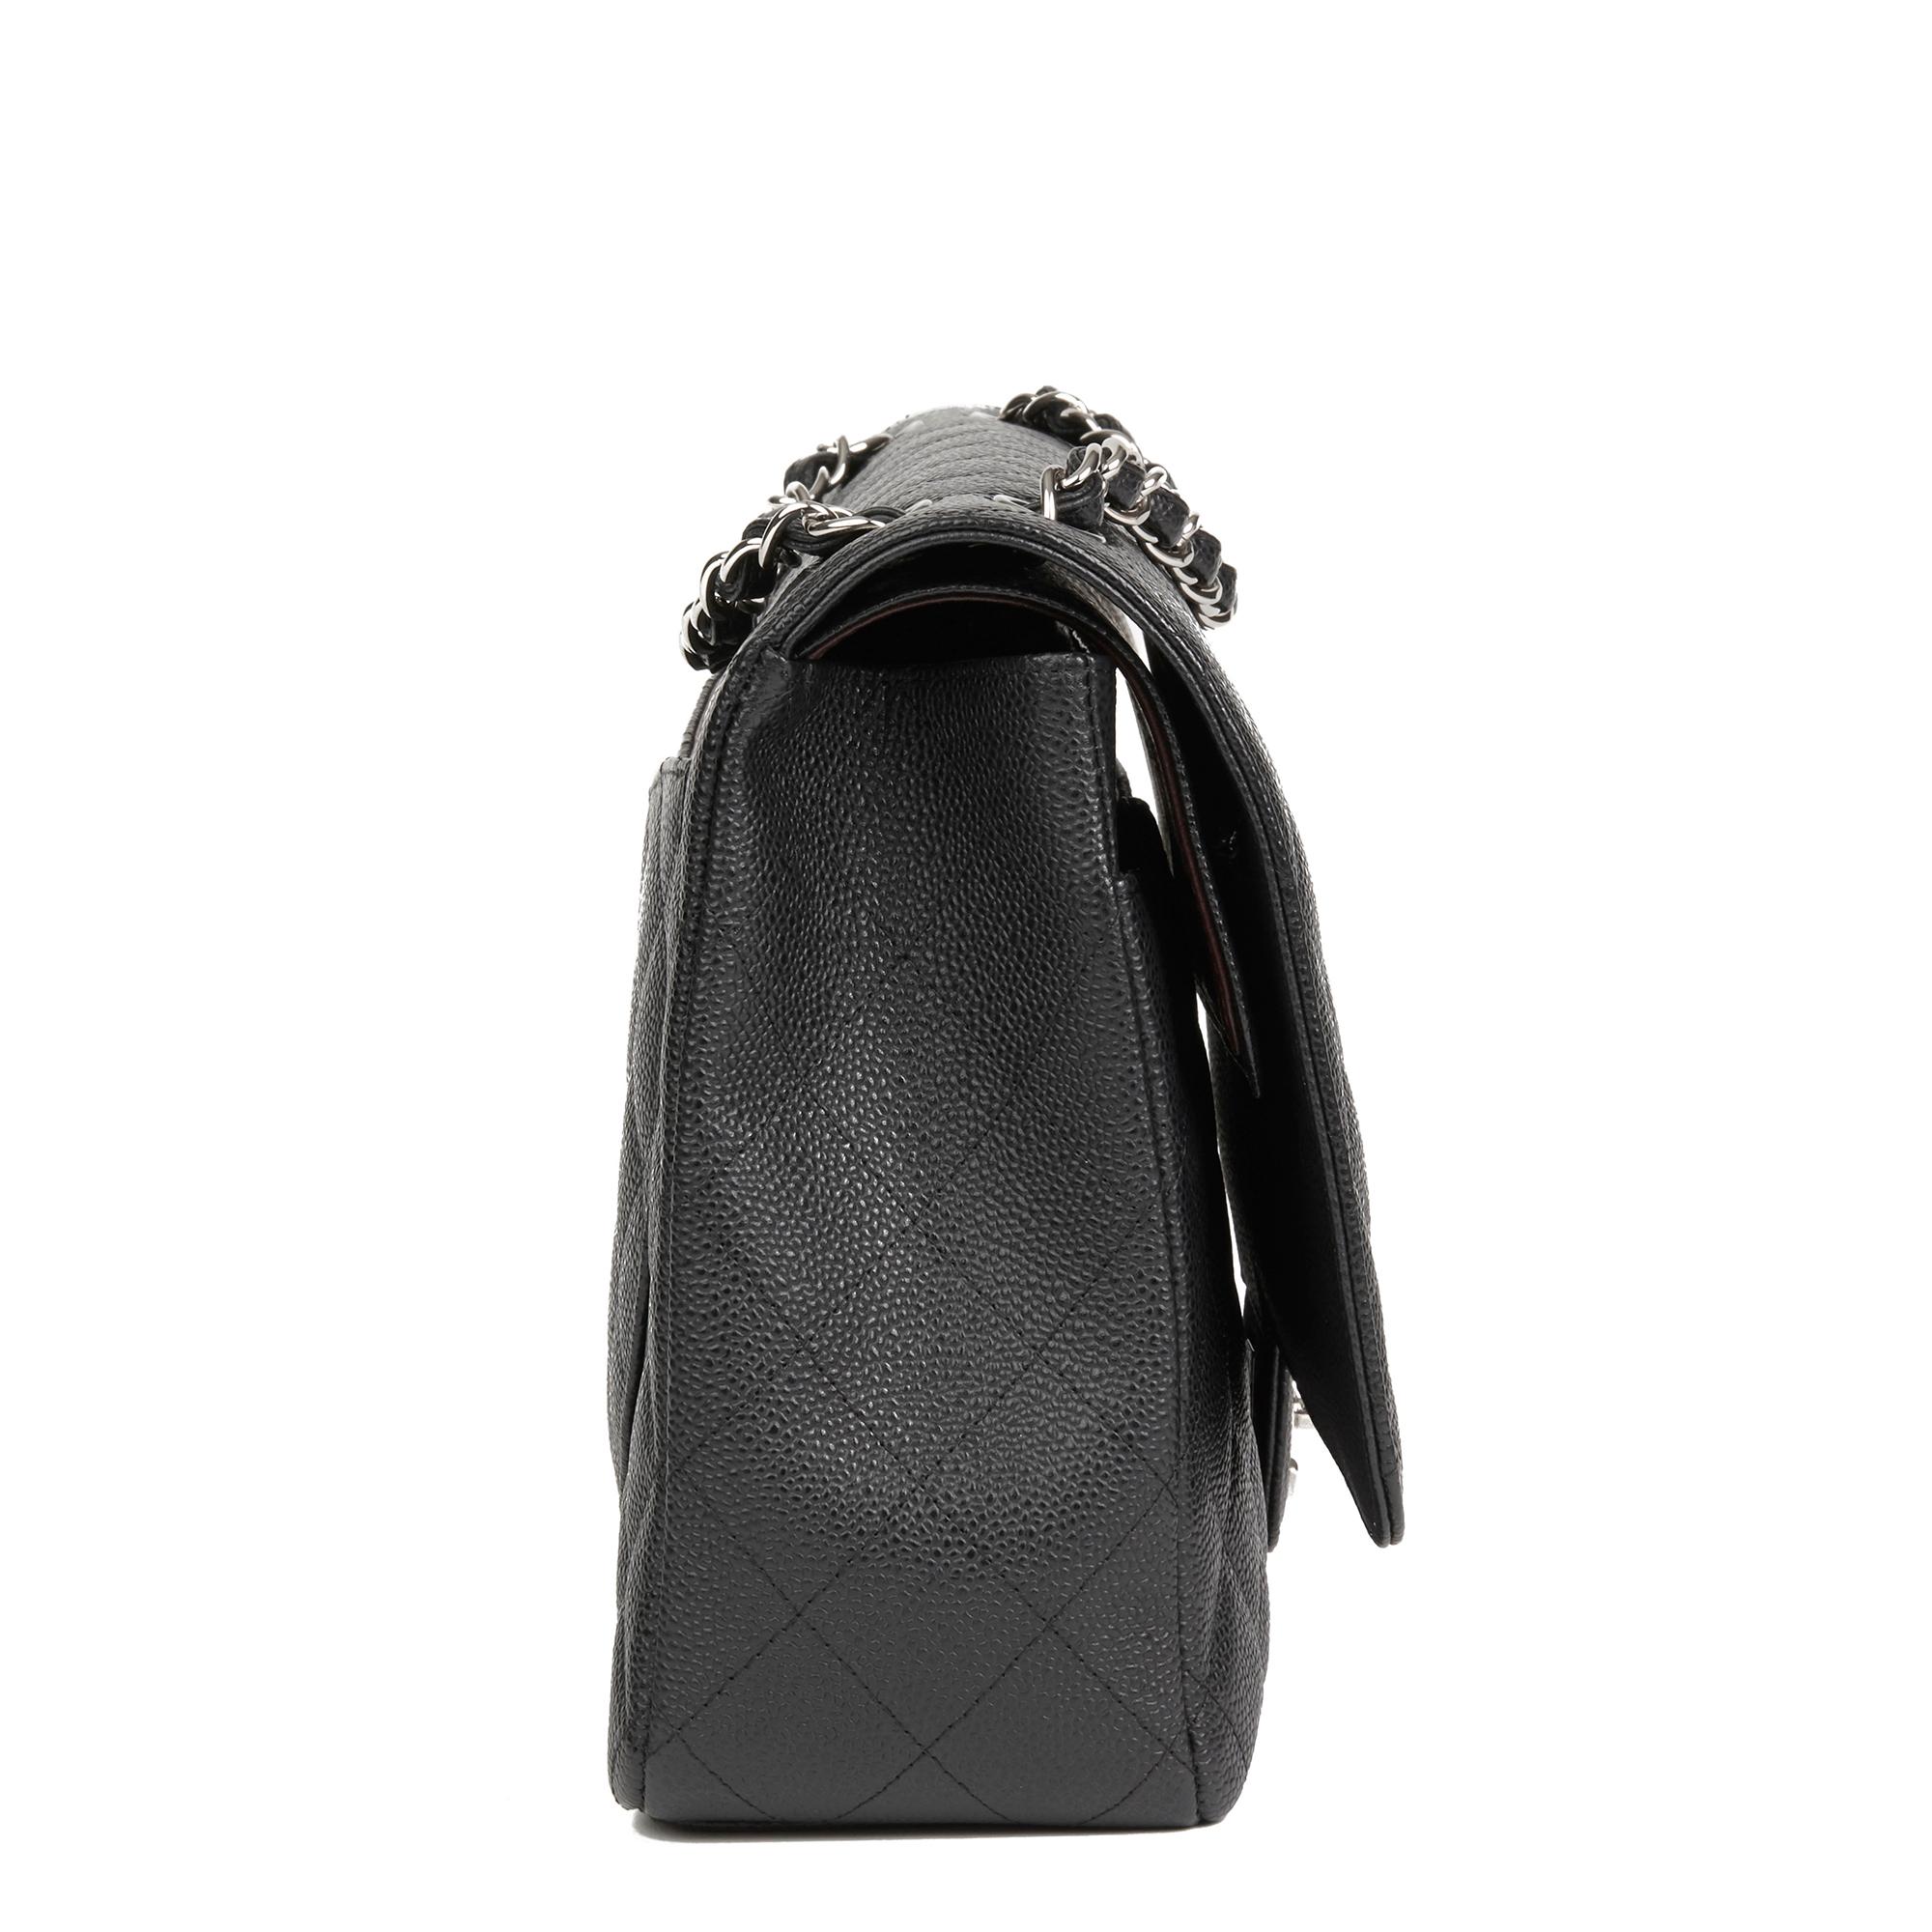 CHANEL
Black Quilted Caviar Leather Maxi Classic Double Flap Bag

 Reference: HB2807
Serial Number: 16761807
Age (Circa): 2012
Accompanied By: Chanel Dust Bag, Box, Authenticity Card
Authenticity Details: Serial Sticker, Authenticity Card (Made in